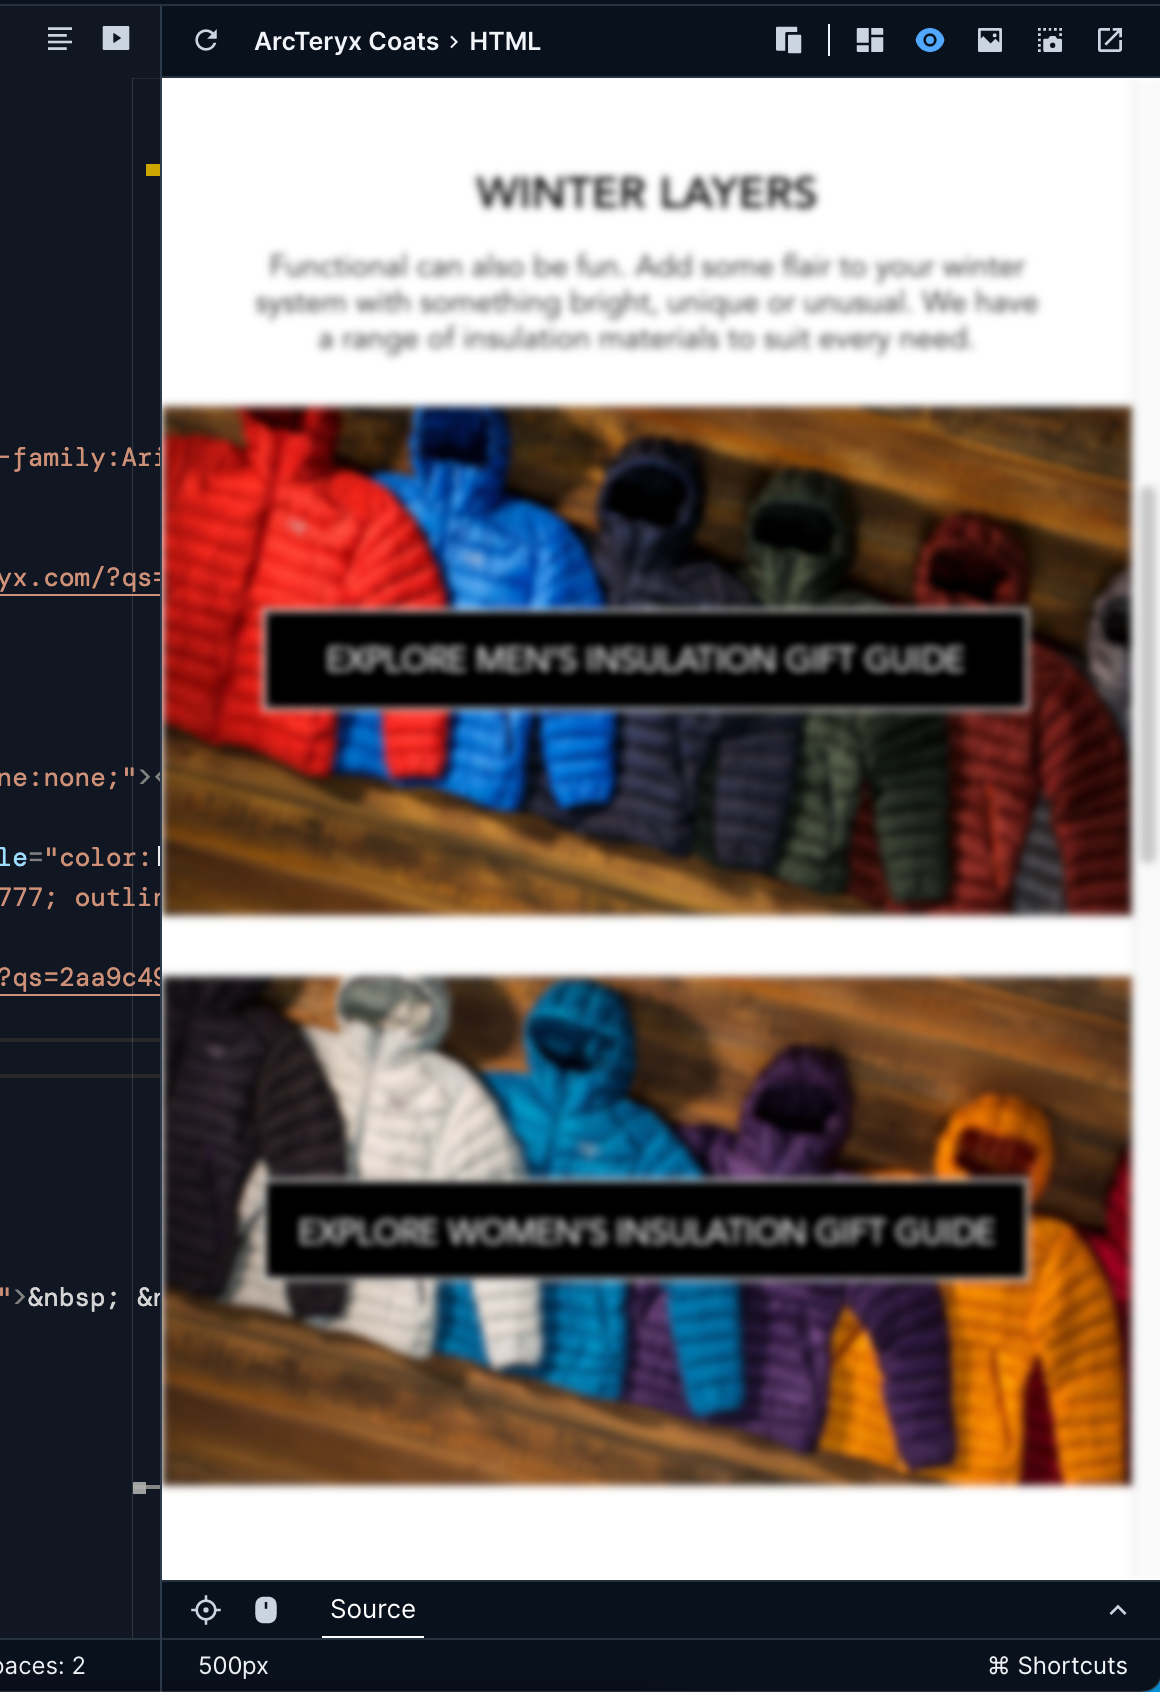 Up close image of the Preview, showing the same email advertising winter jackets. The text and images have been significantly blurred and are much harder to read.